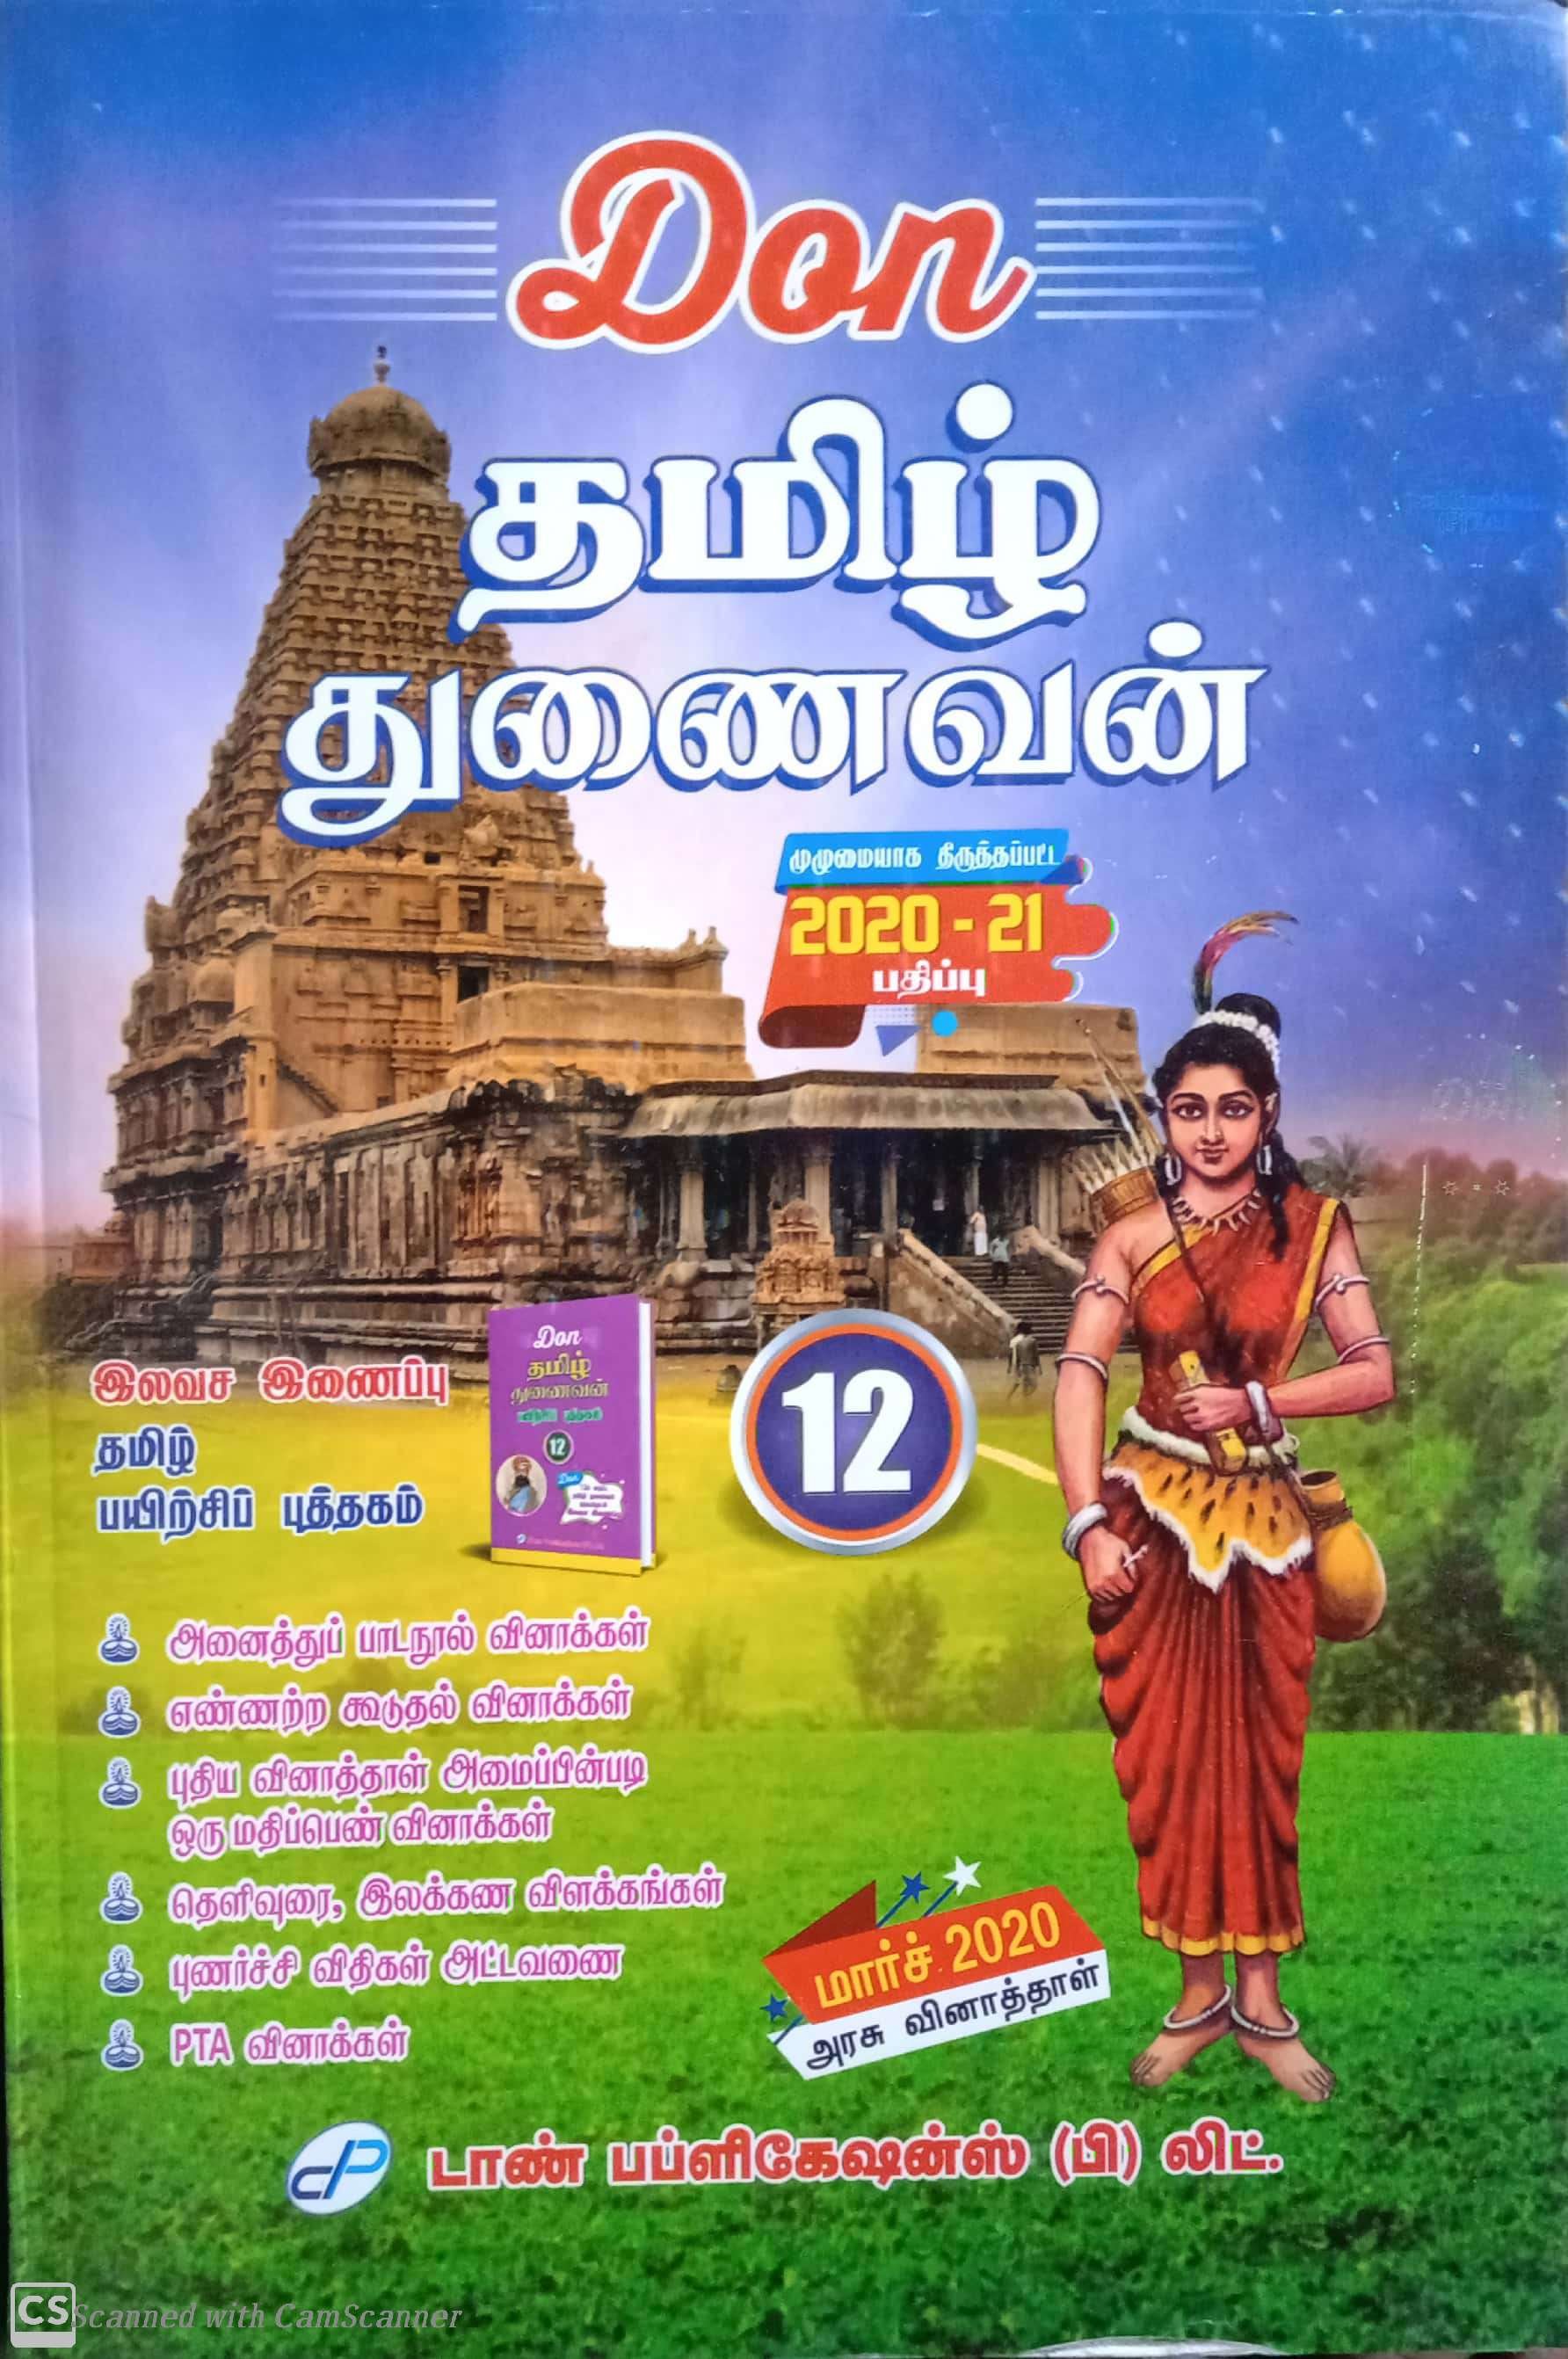 Routemybook Buy 12th Standard Don Tamil À®¤à®® À®´ Guide Based On New Syllabus 2020 2021 By Dr S A Rajkumar Online At Lowest Price In India Tamildon.com is 8 years 6 months old. guide based on new syllabus 2020 2021